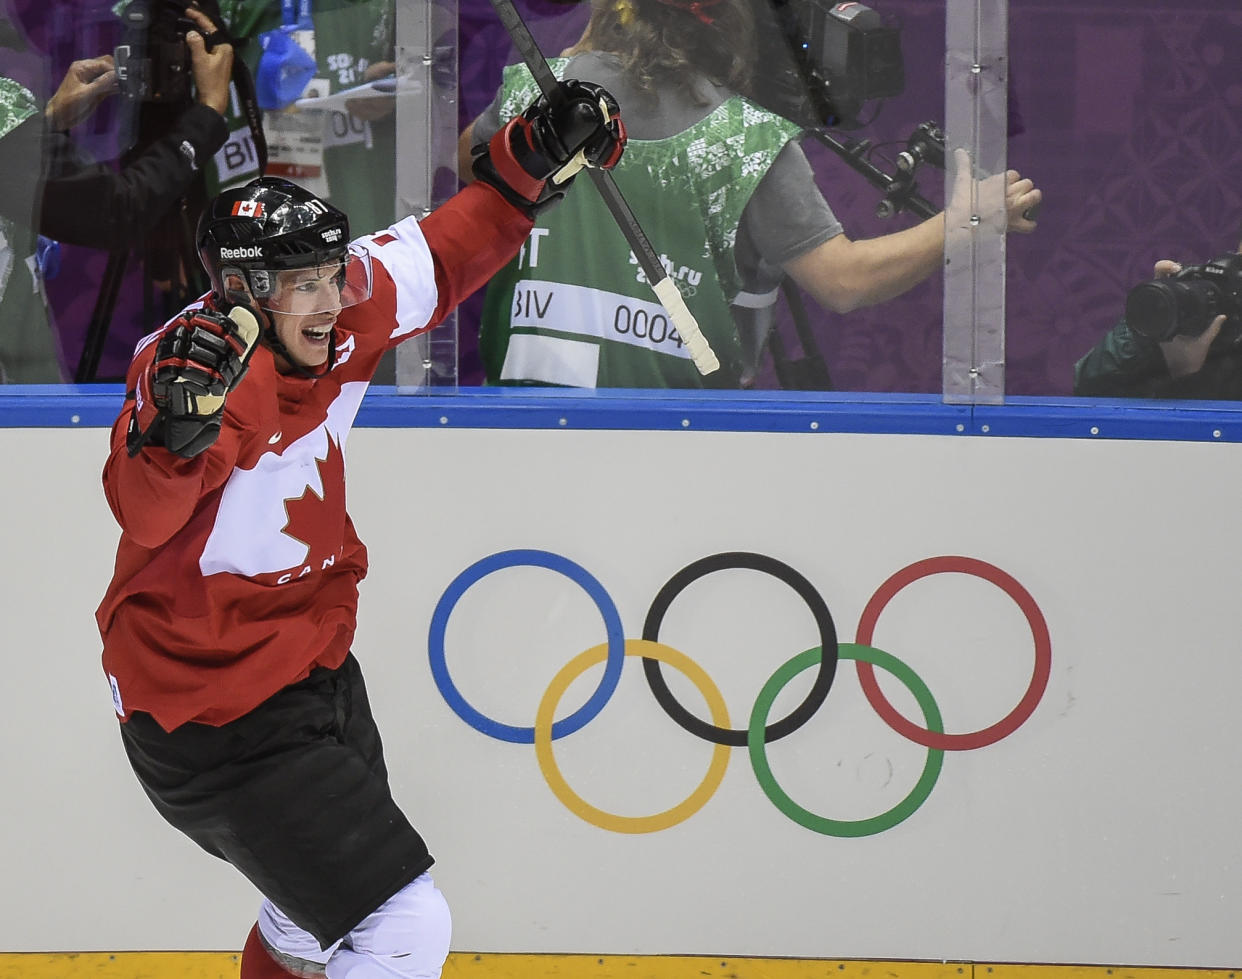 NHL players made the mark in the last Olympics, when Canada defeated Sweden